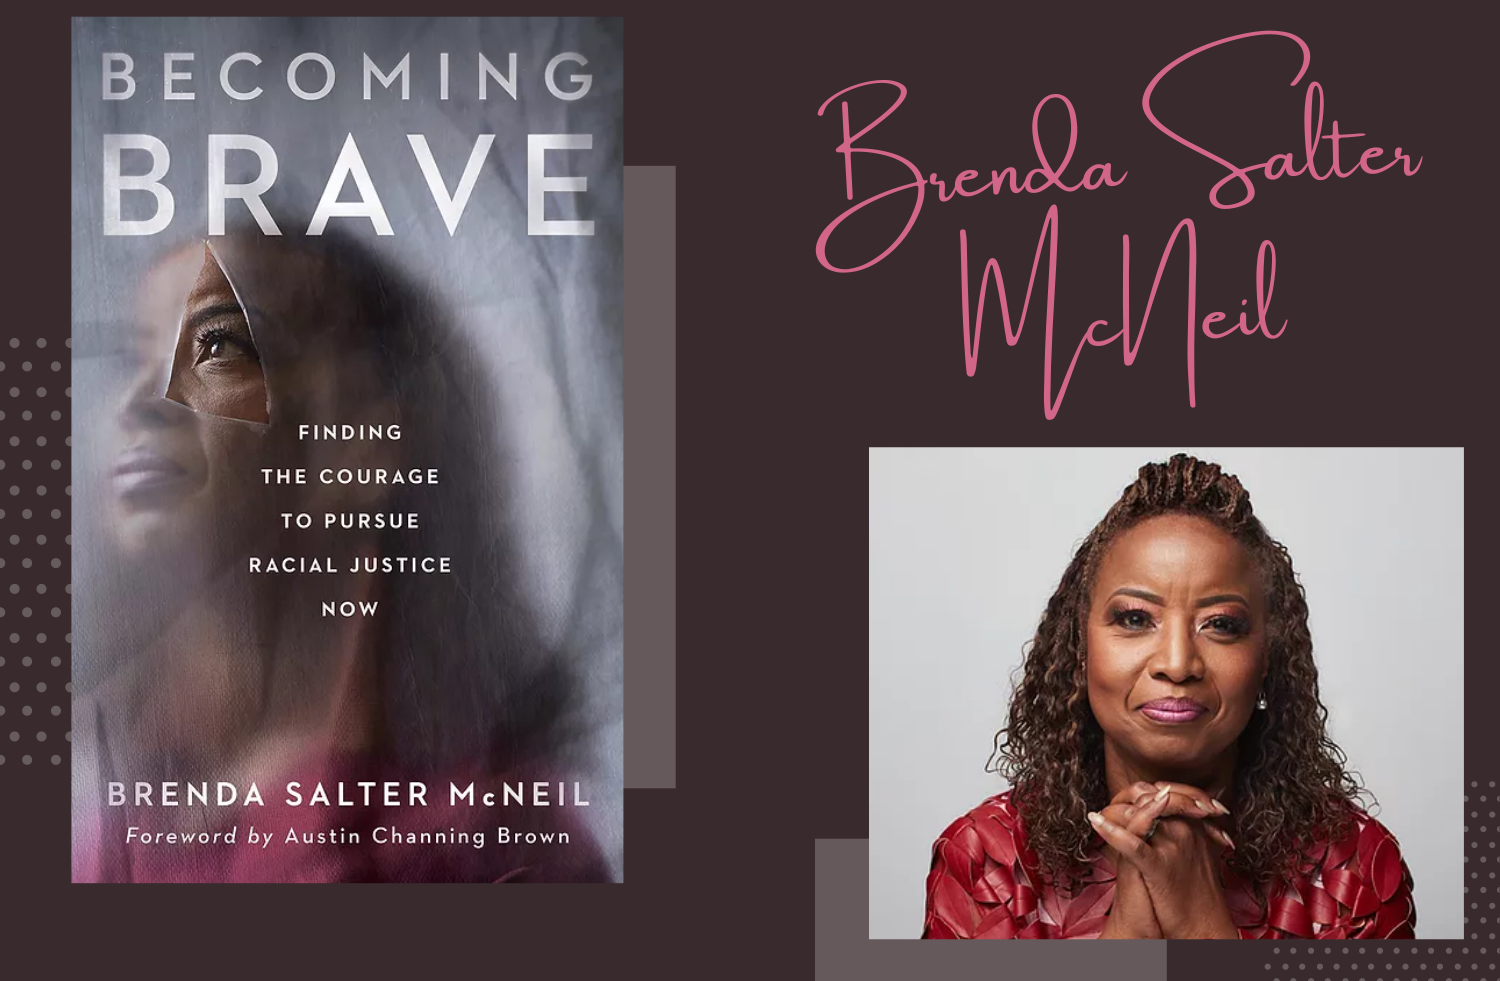 Becoming Brave: Finding the Courage to Pursue Racial Justice Now by Brenda Salter McNeil